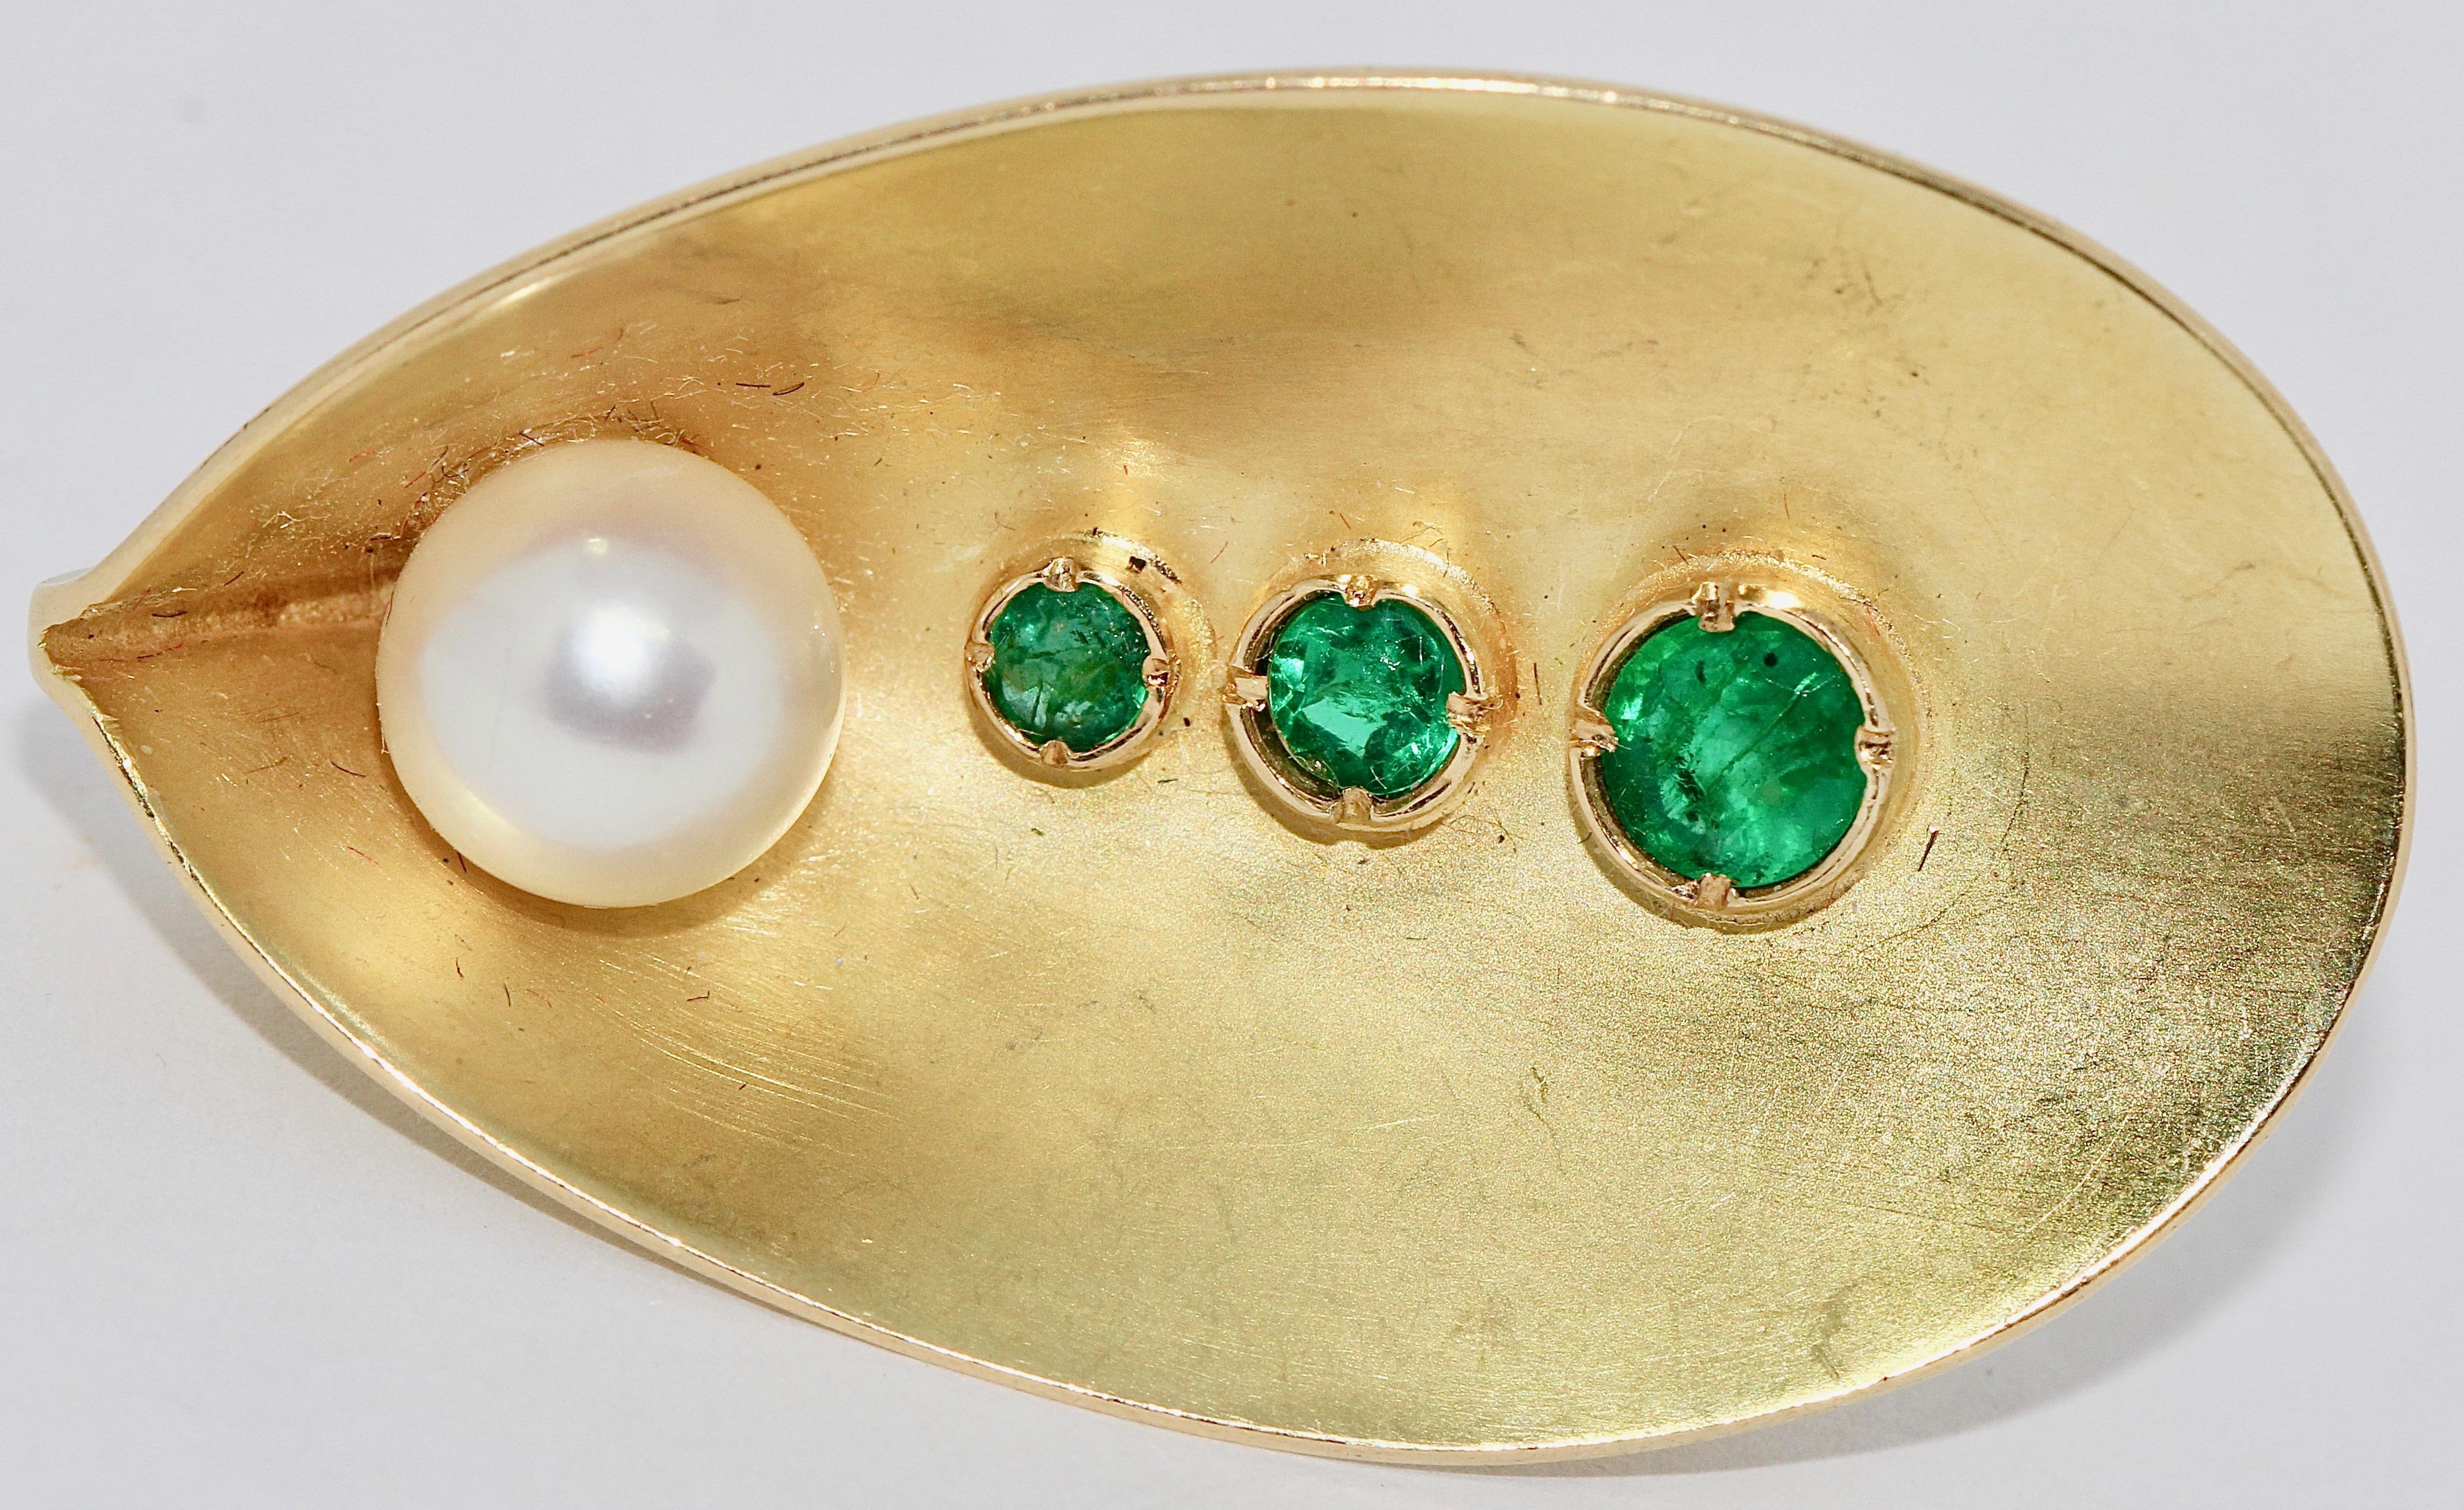 Eye-catching, solid designer ring in 18 Karat gold with emeralds and a pearl.

Hallmarked: 750.

US Ring size 7